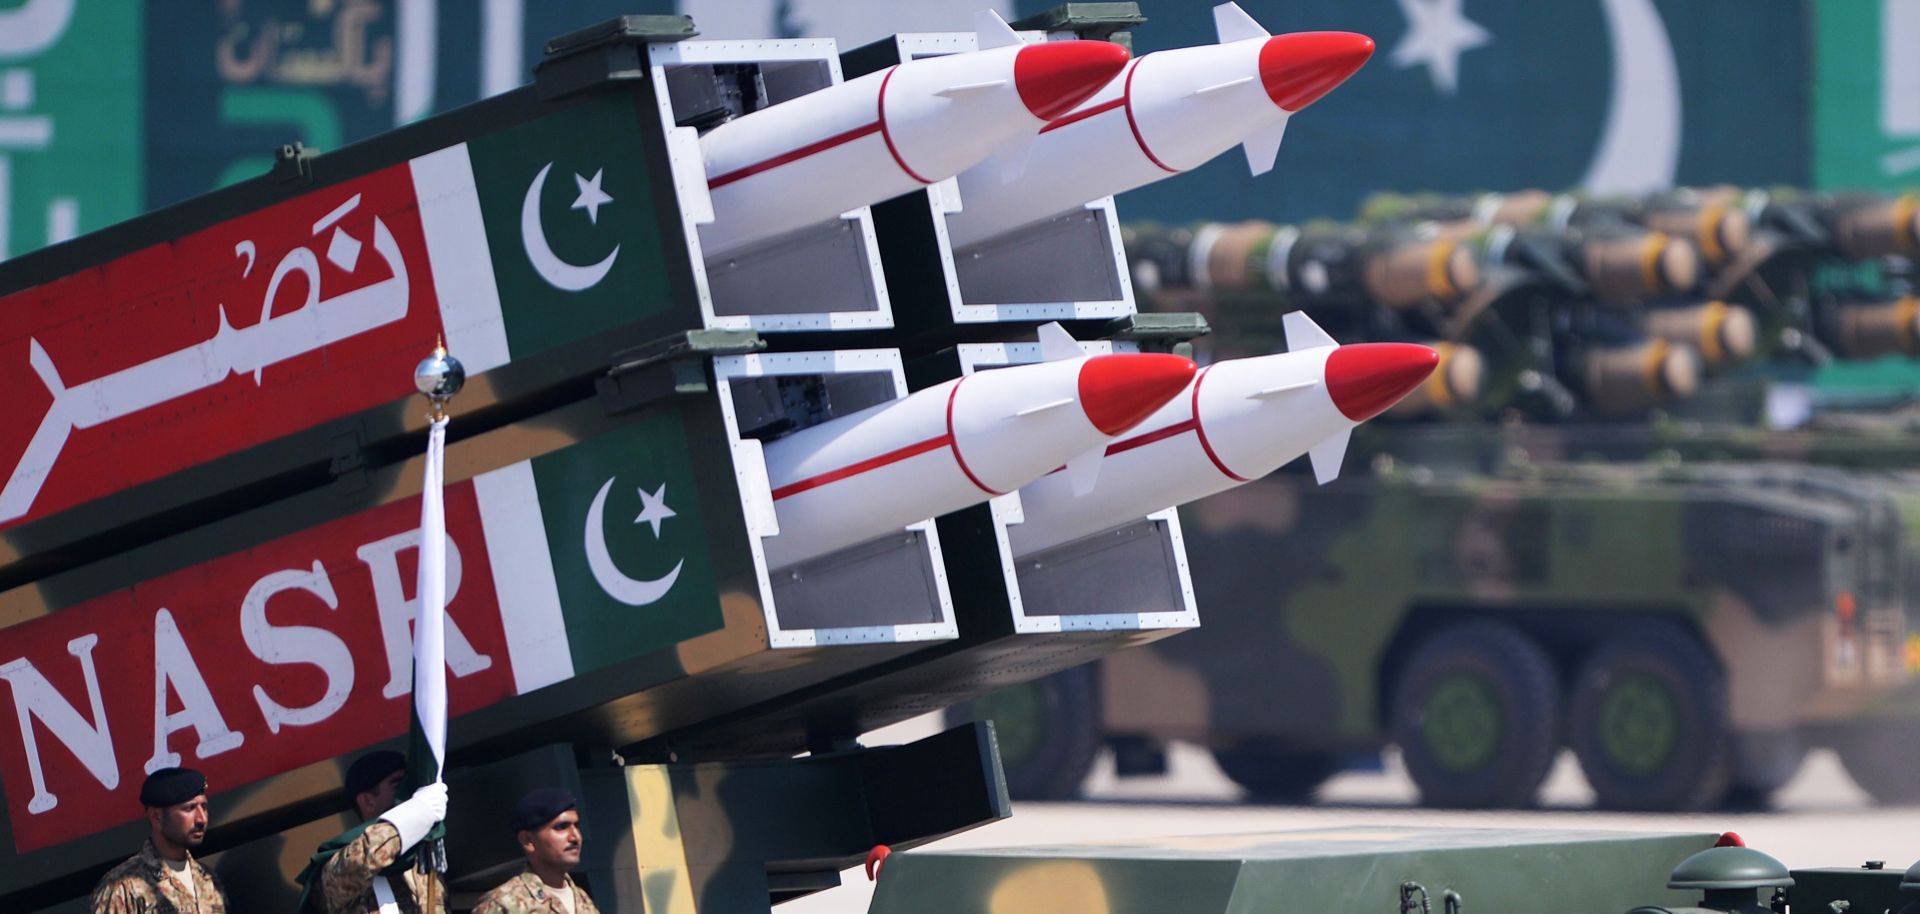 Pakistani military personnel stand beside a low-yield battlefield deterrent short-range surface-to-surface missile during the Pakistan Day military parade in Islamabad.